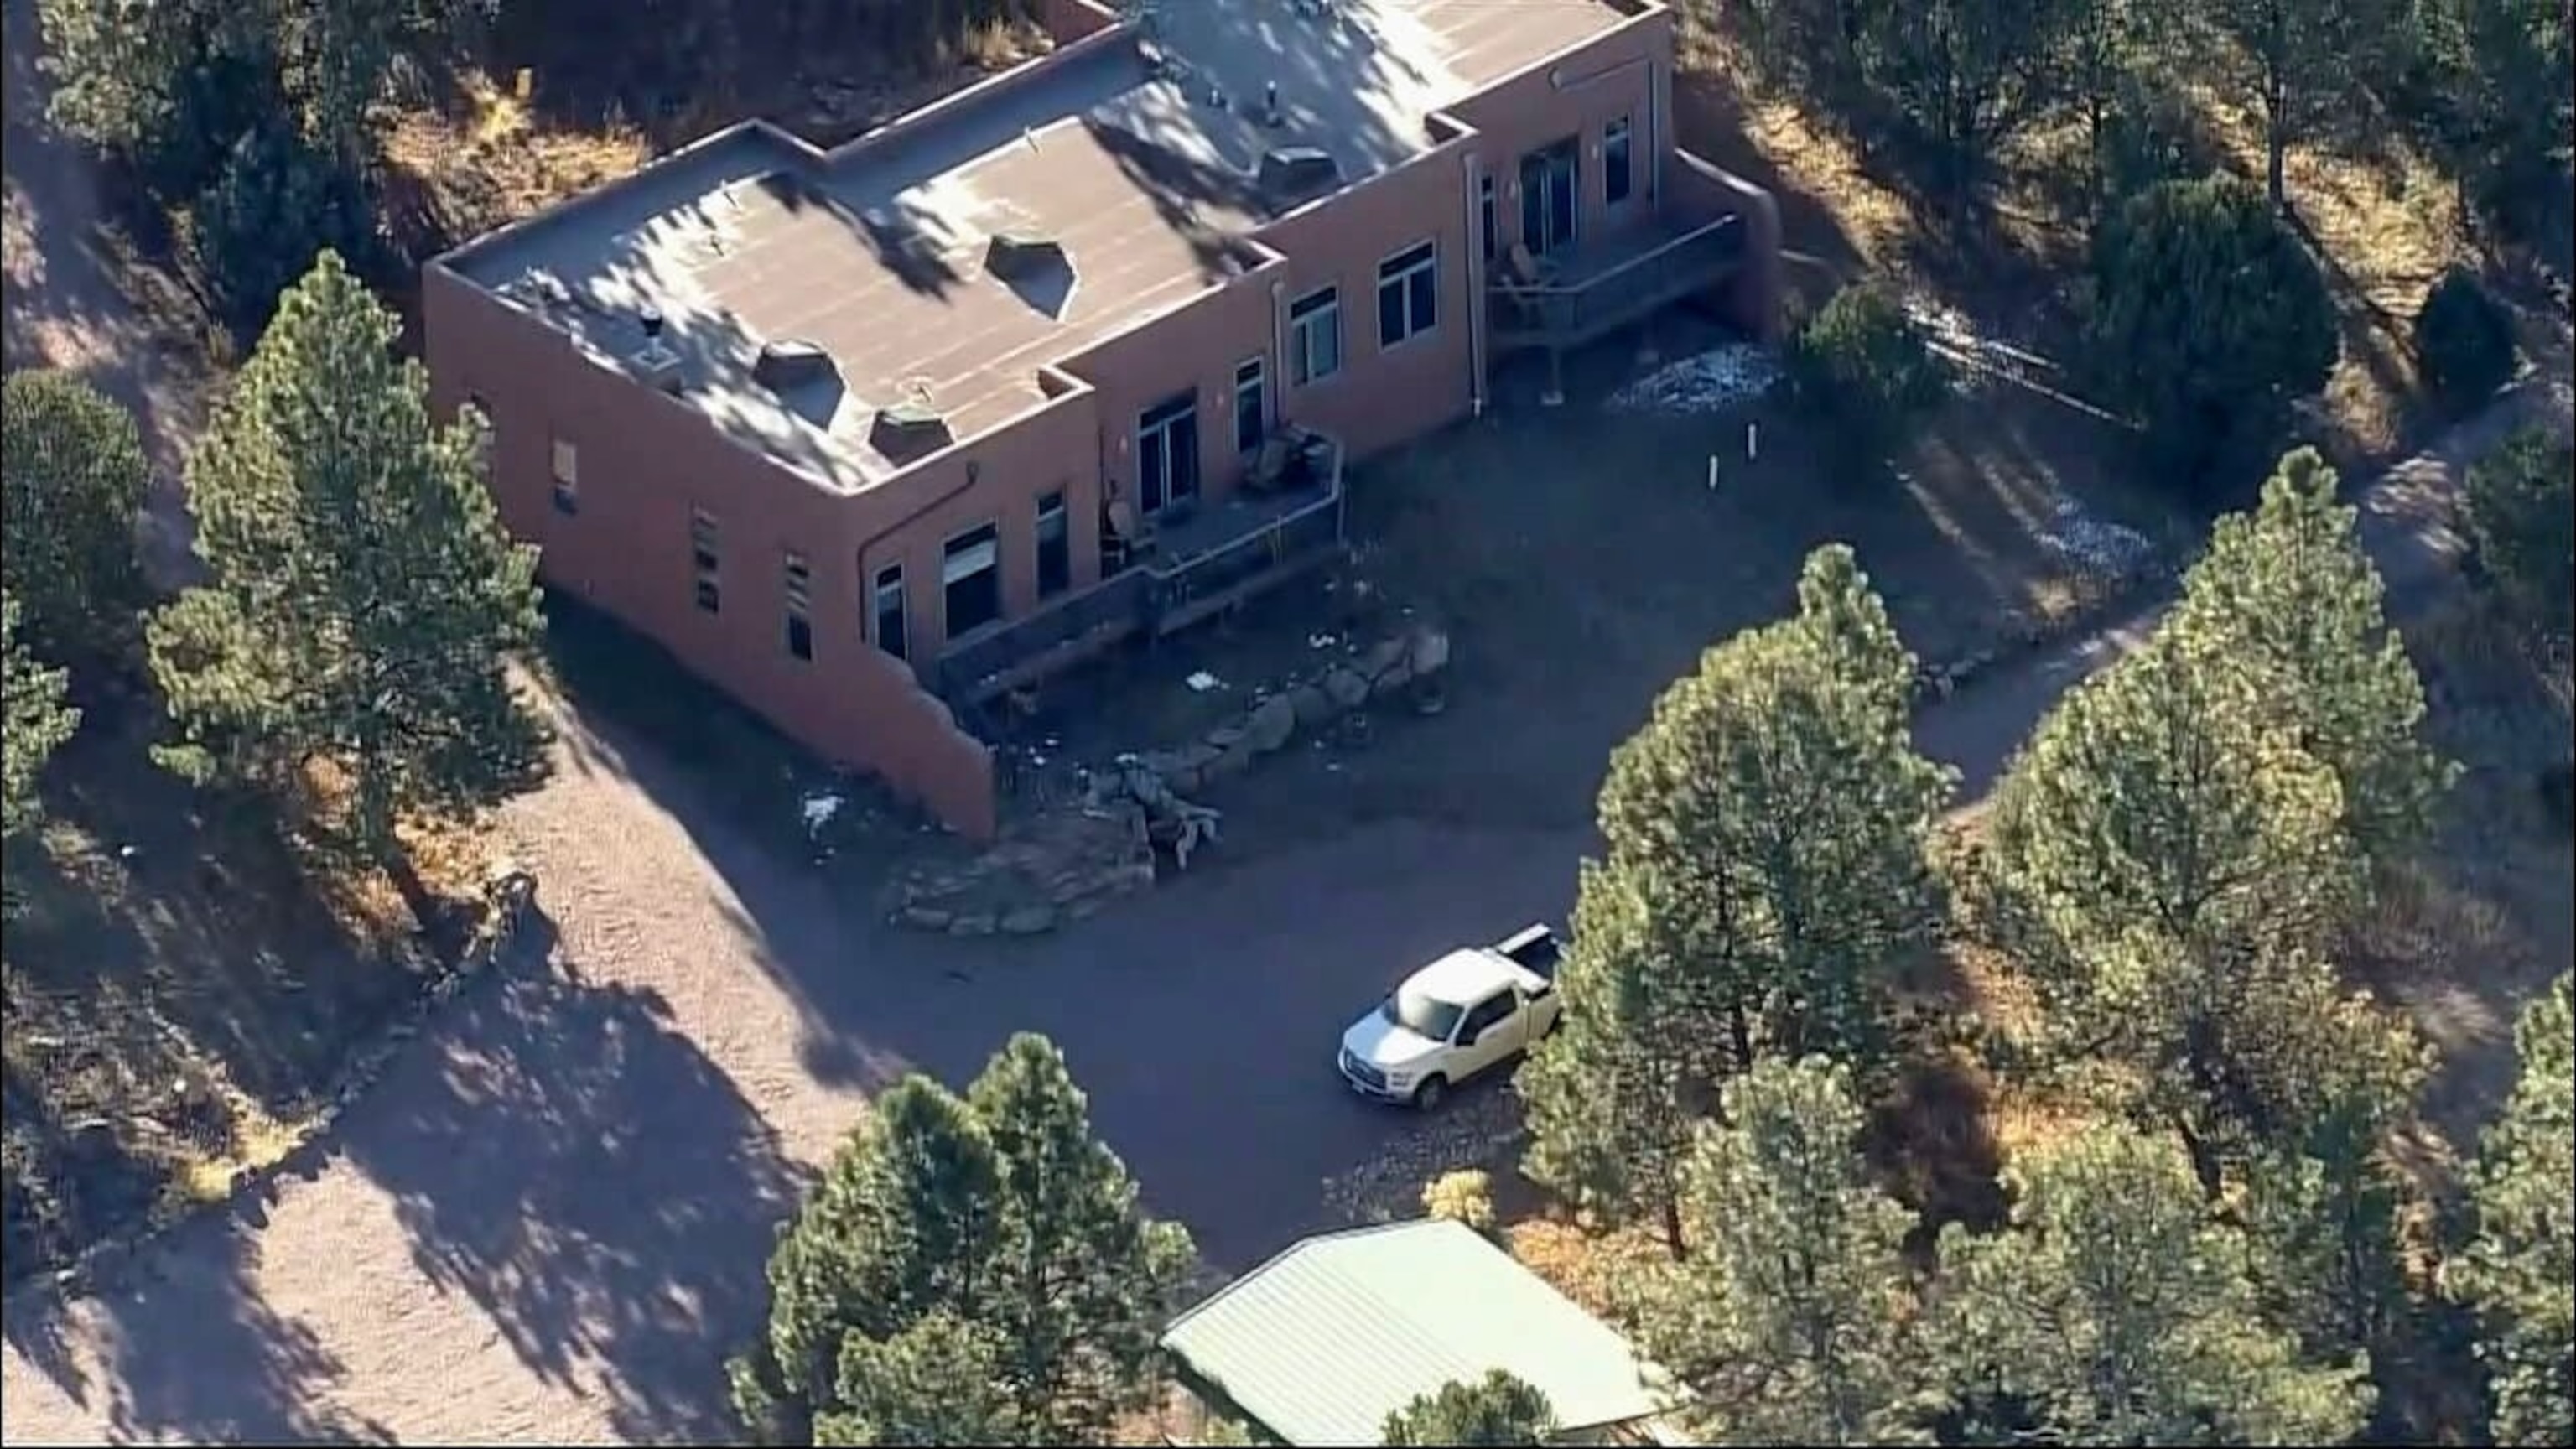 PHOTO: The shooting was reported near a residence in rural Custer County, Colorado, authorities said.